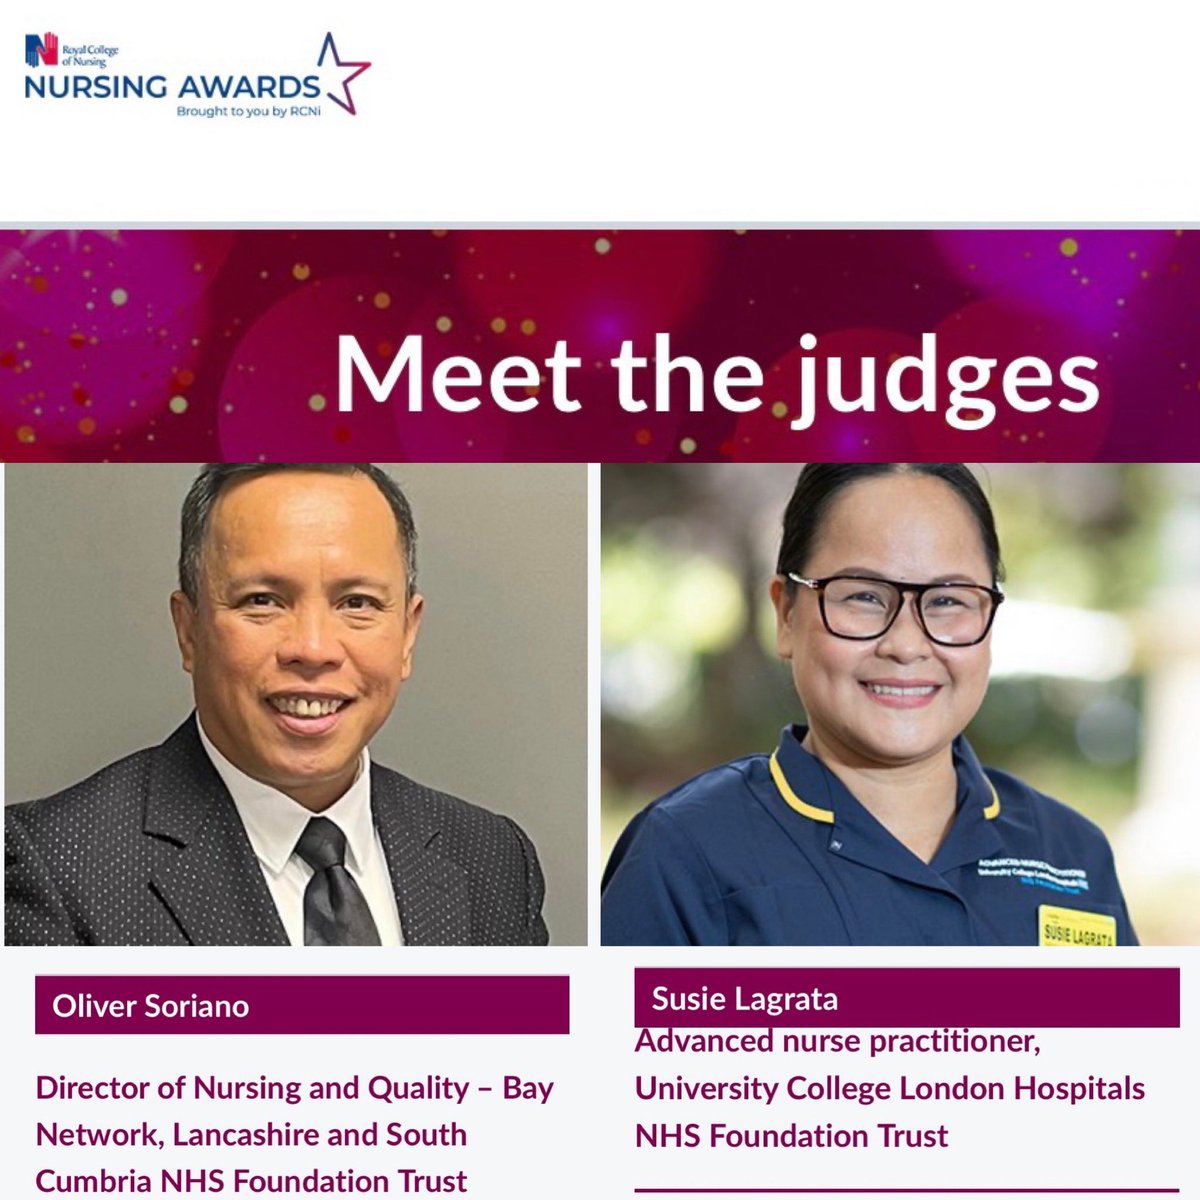 We are delighted that 2 of our members are part of the illustrious line up of the prestigious #RCNawards  judging panel.

We encourage everyone to submit their entry now & show how your practice improved patient care.
Entries for #RCNawards close 28 April.
rcn-nursing-awards.co.uk